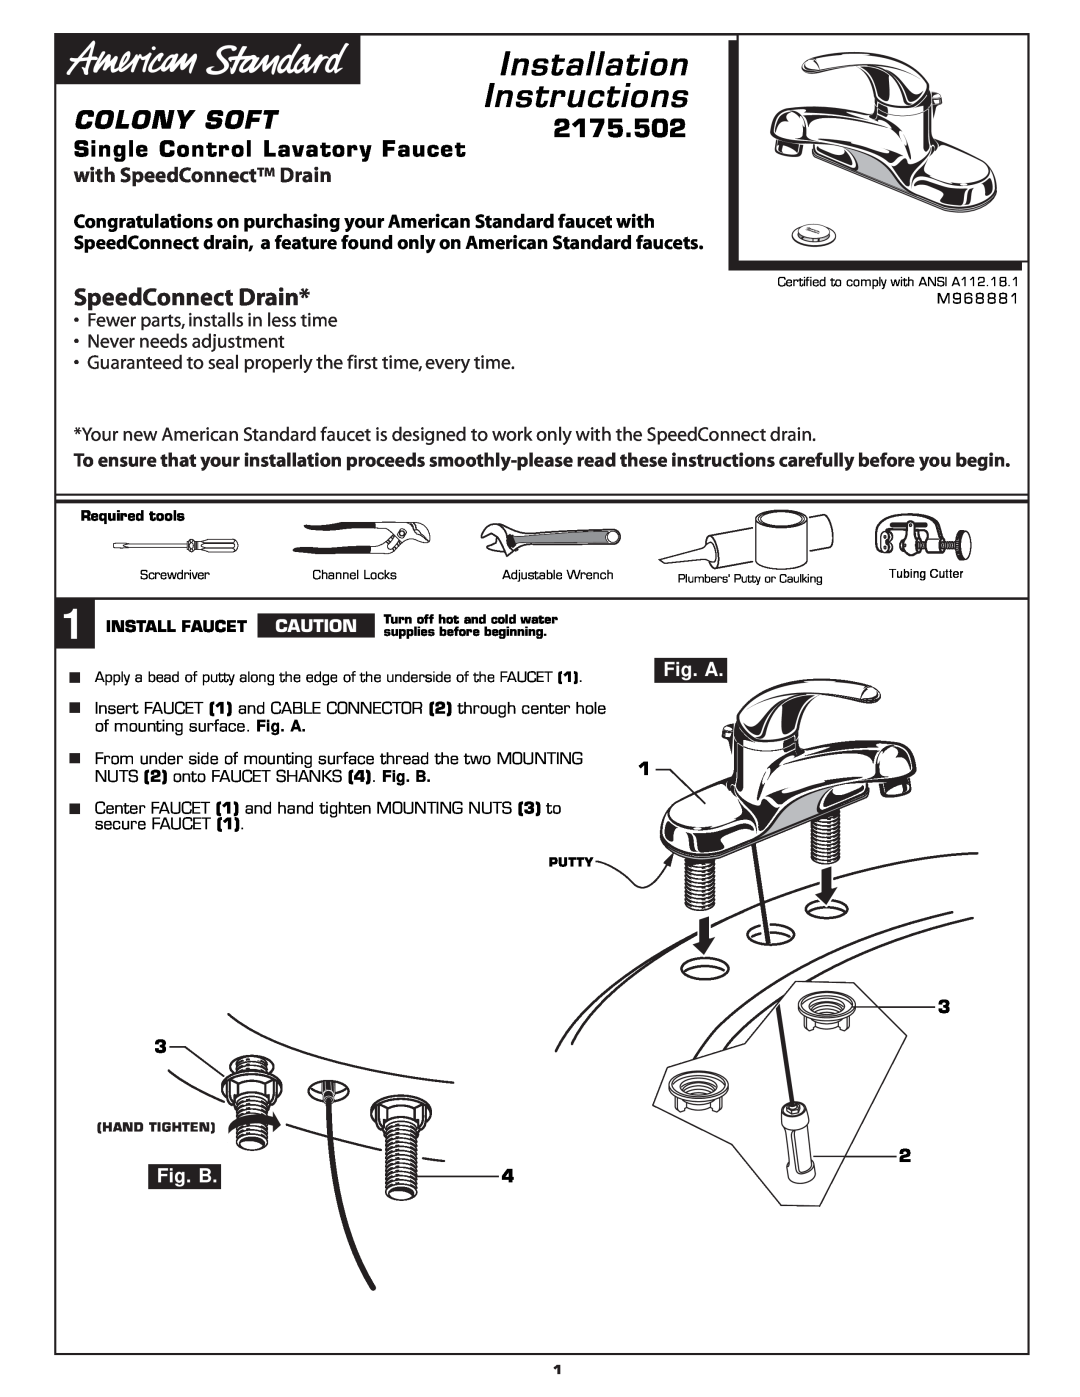 American Standard 2175.502 installation instructions Install Faucet, Installation Instructions, Colony Soft, Fig. A 